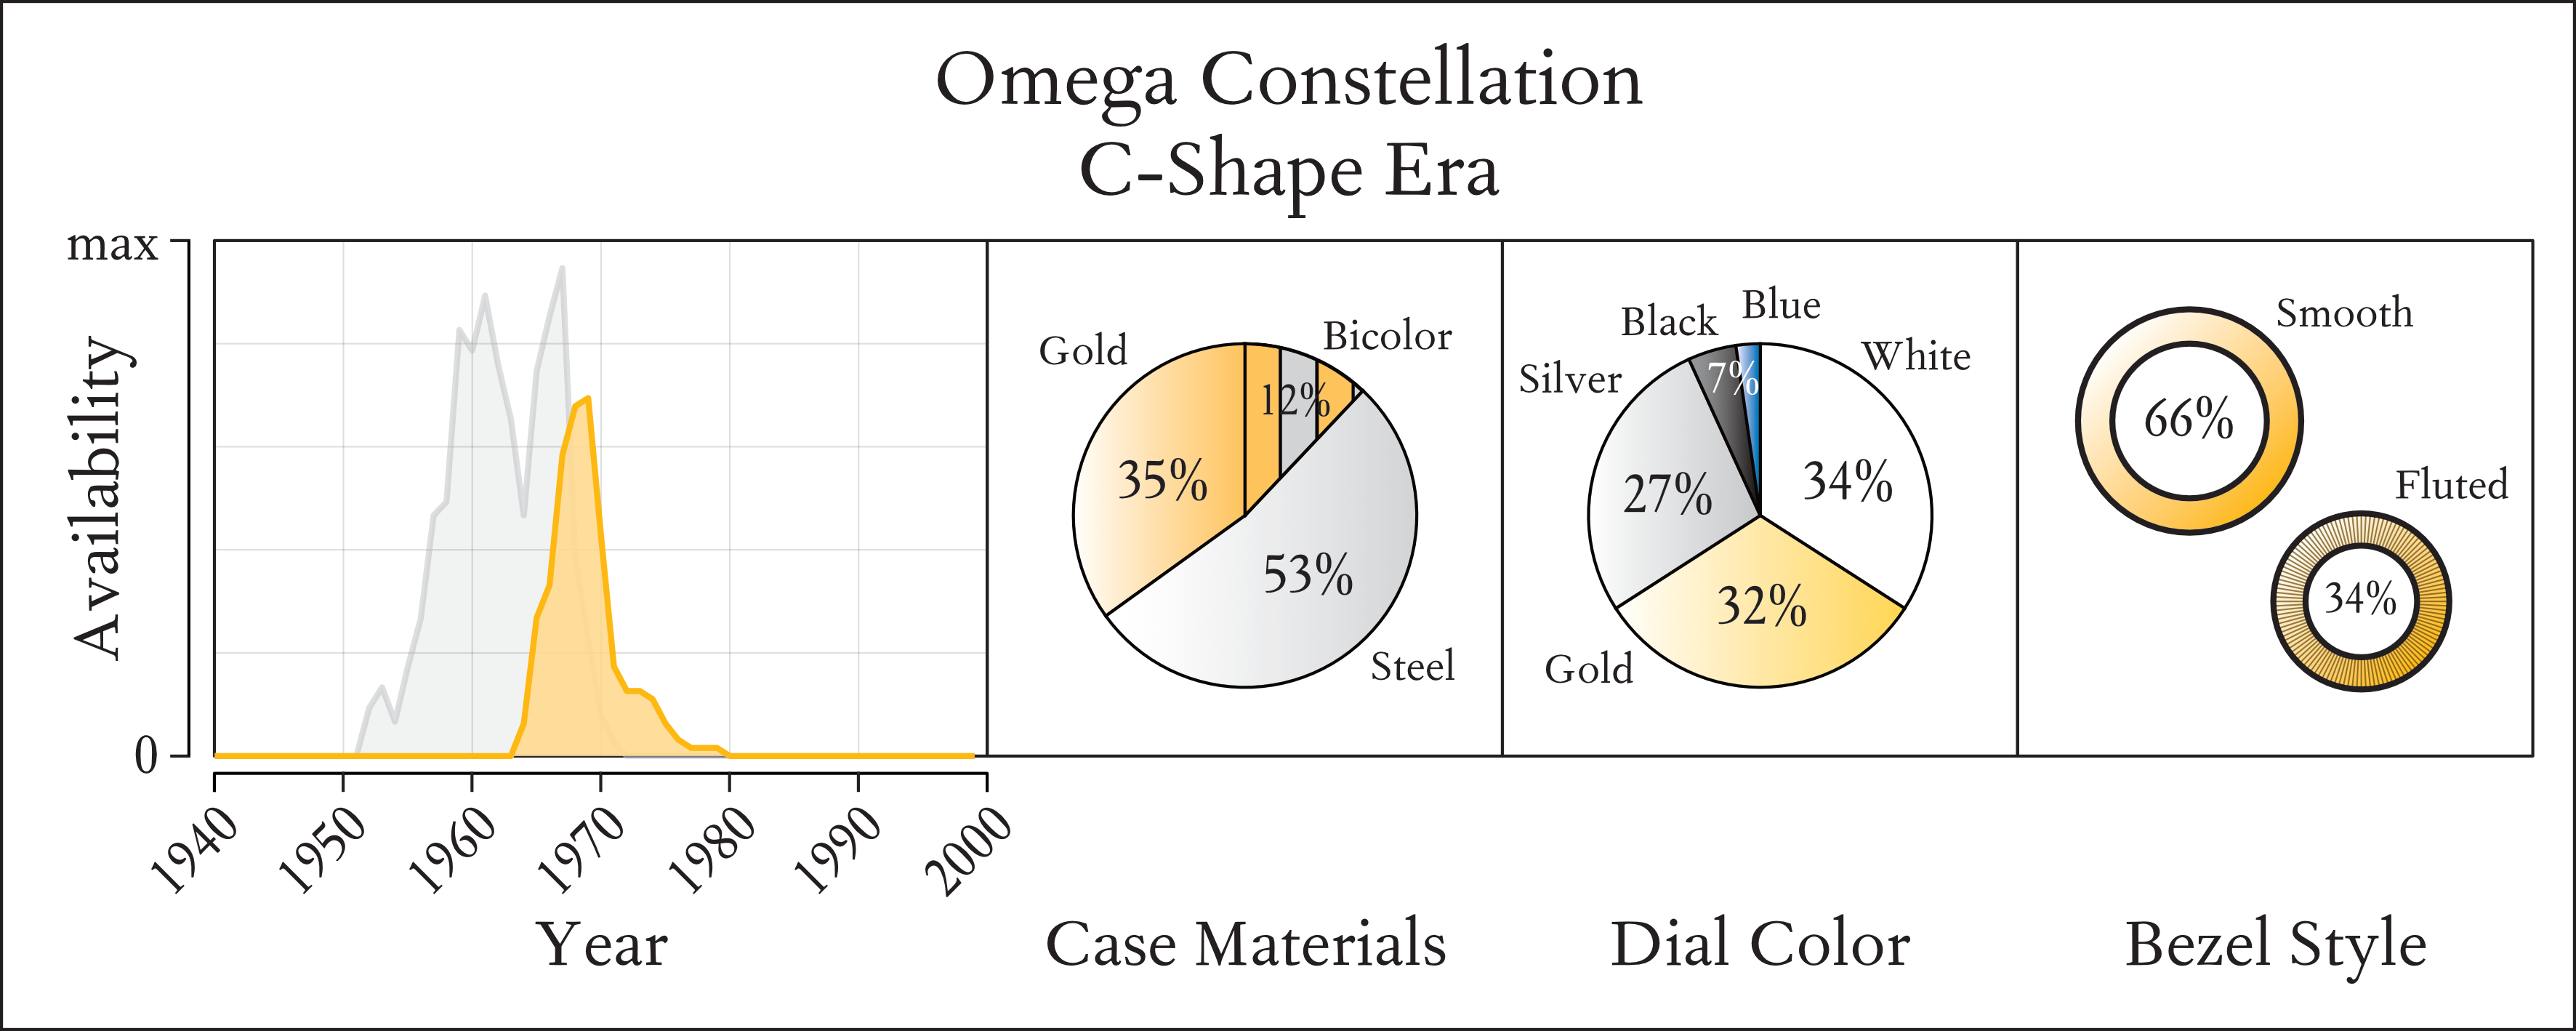 Figure 1. A quantitative guide to the Omega Constellation C-shape, showing market-wide availability (gold for C-shape, grey for pie pan) on the left, as well as distribution of case material (middle left), dial color (middle right), and bezel style (right).